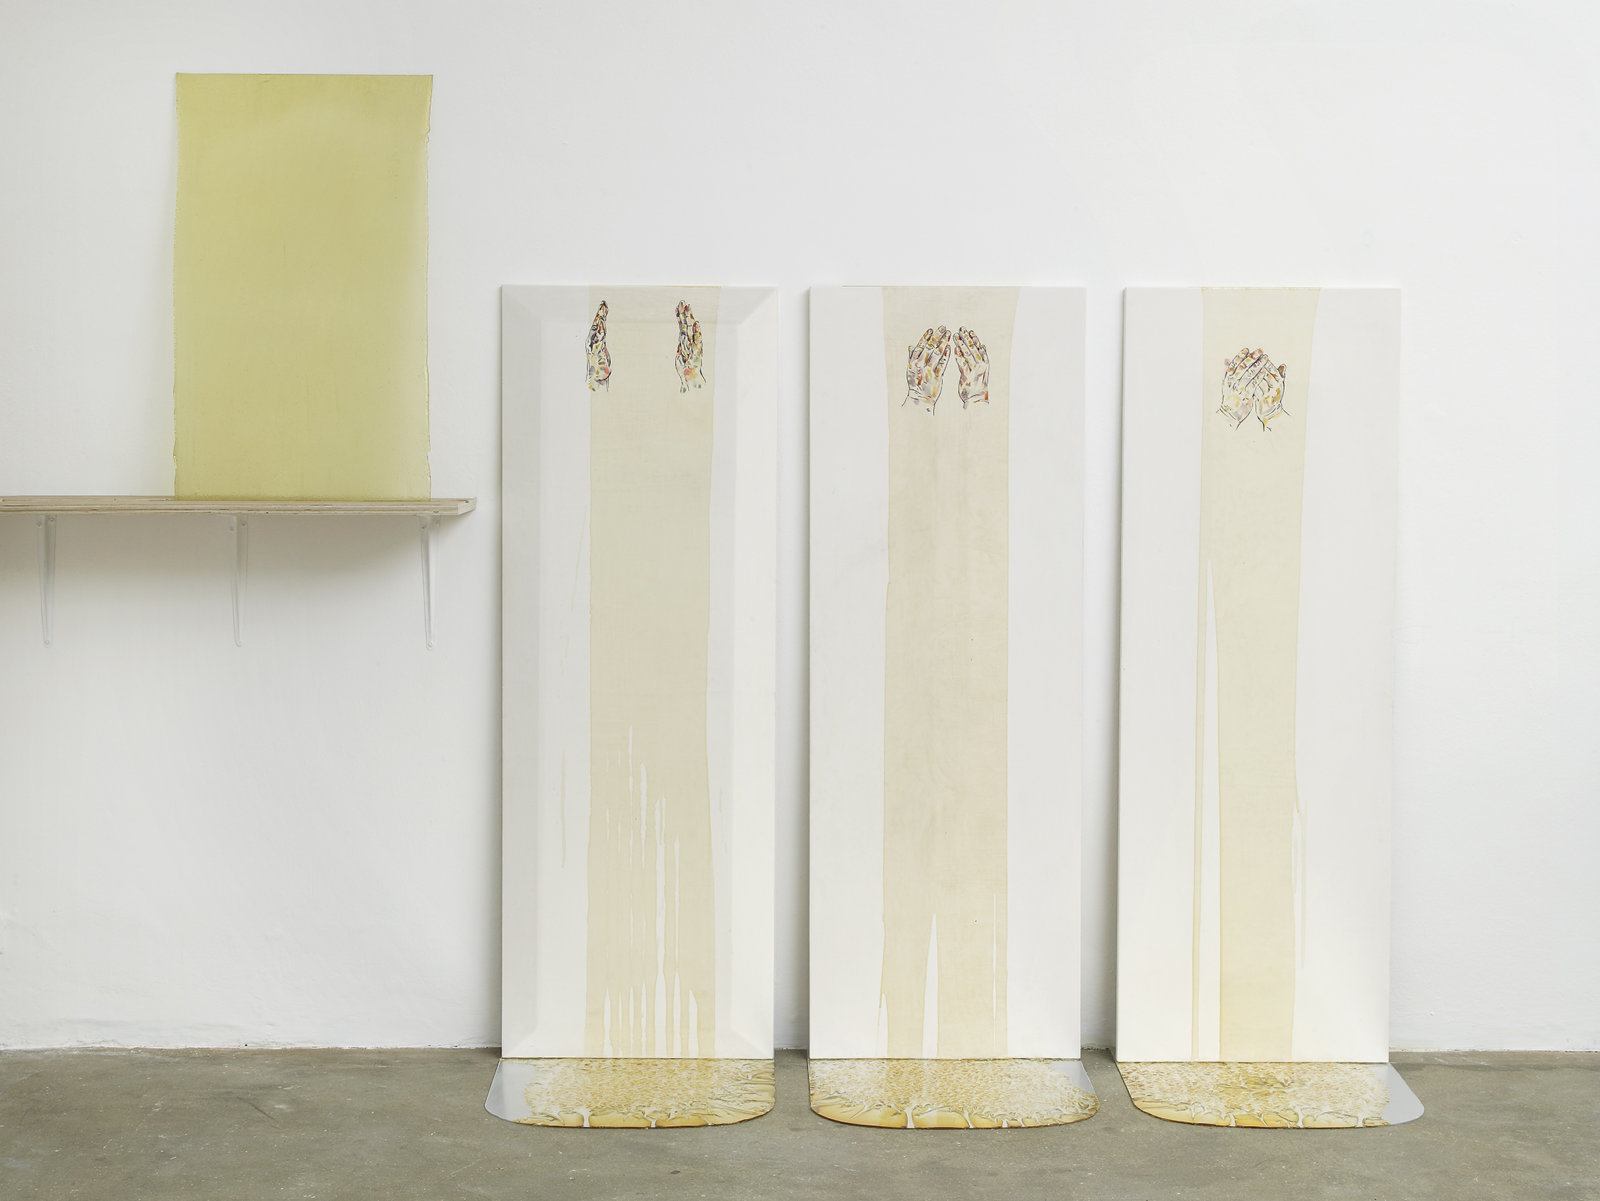 Christina Mackie, Dissembling, 2012, watercolour, gesso, perspex, varnish, dimensions variable. Installation view, Painting the Weights, Chisehale Gallery, London, UK, 2012